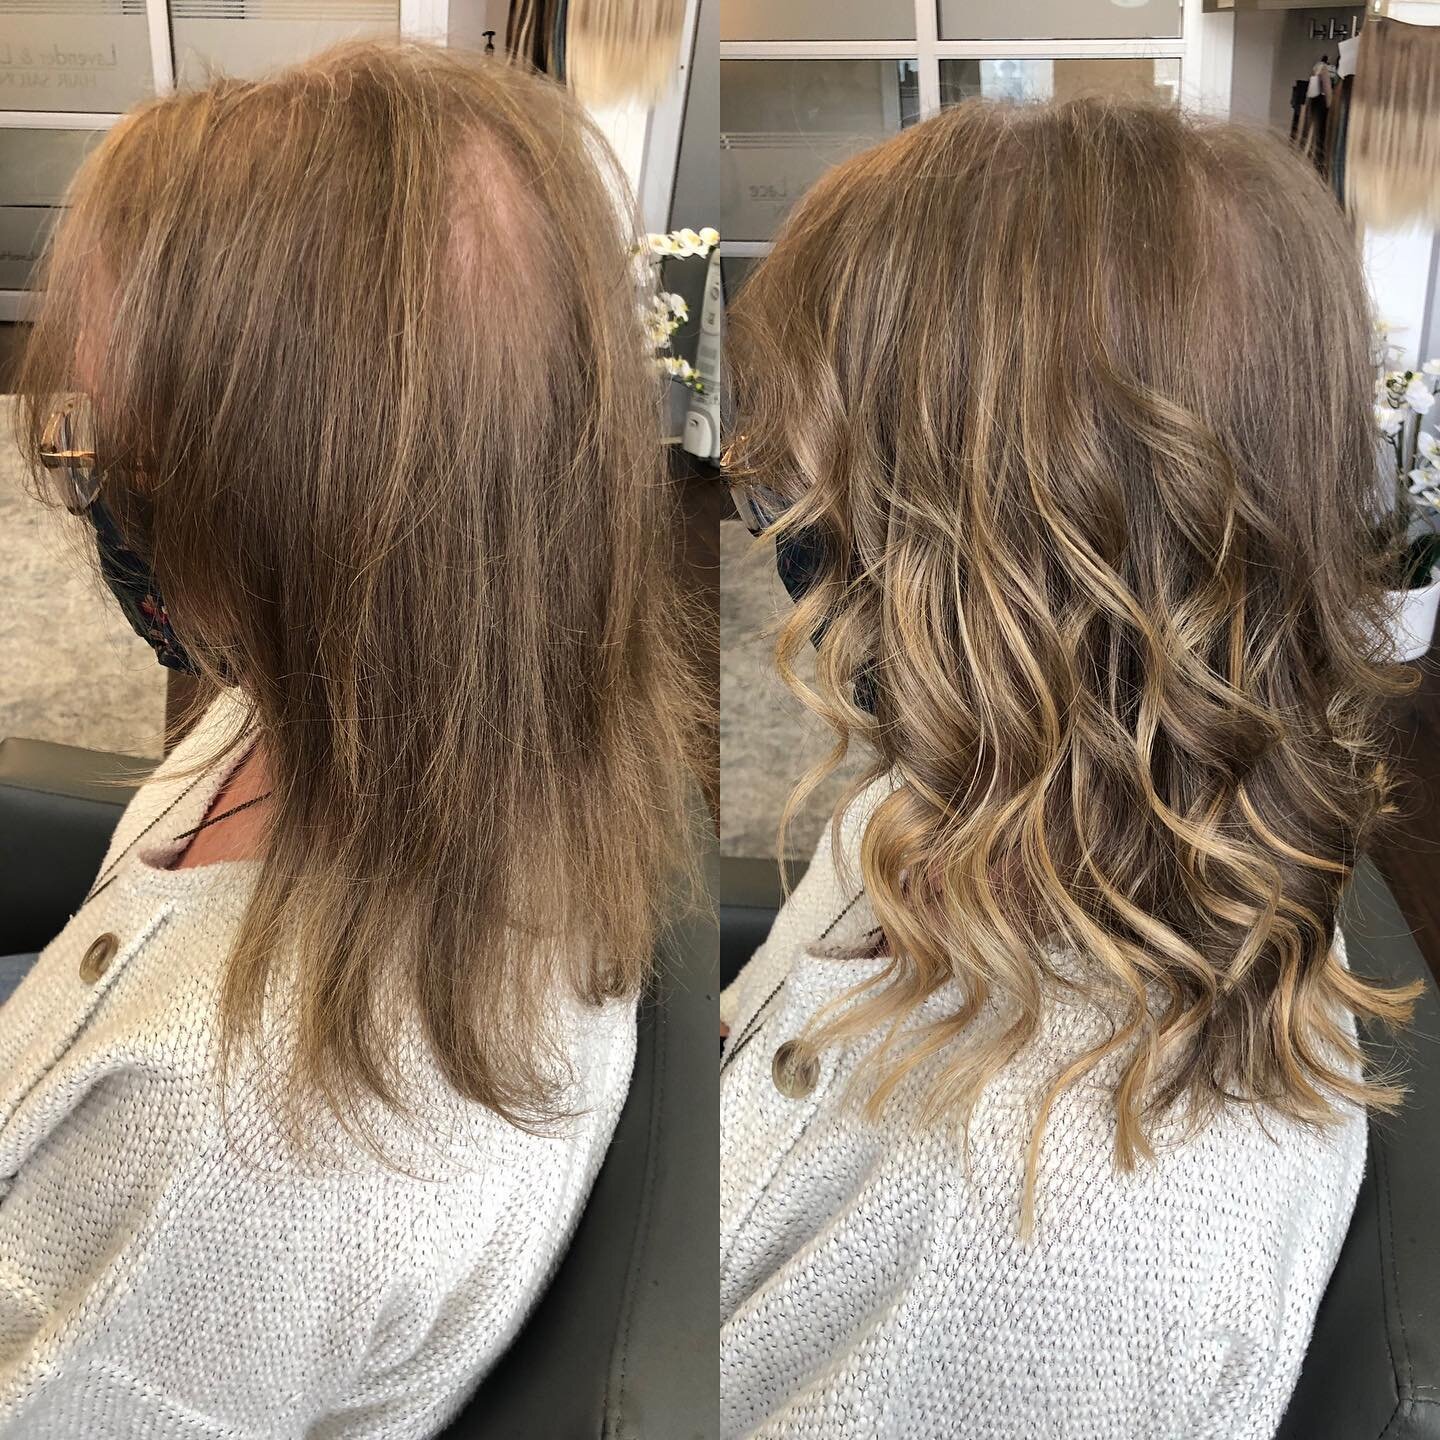 Swipe for more views. What a difference a few hours and a little hair can make. This clients suffered significant hair loss in the past. She has been dealing with it for years and finally worked up the courage to even come and talk to anyone about it